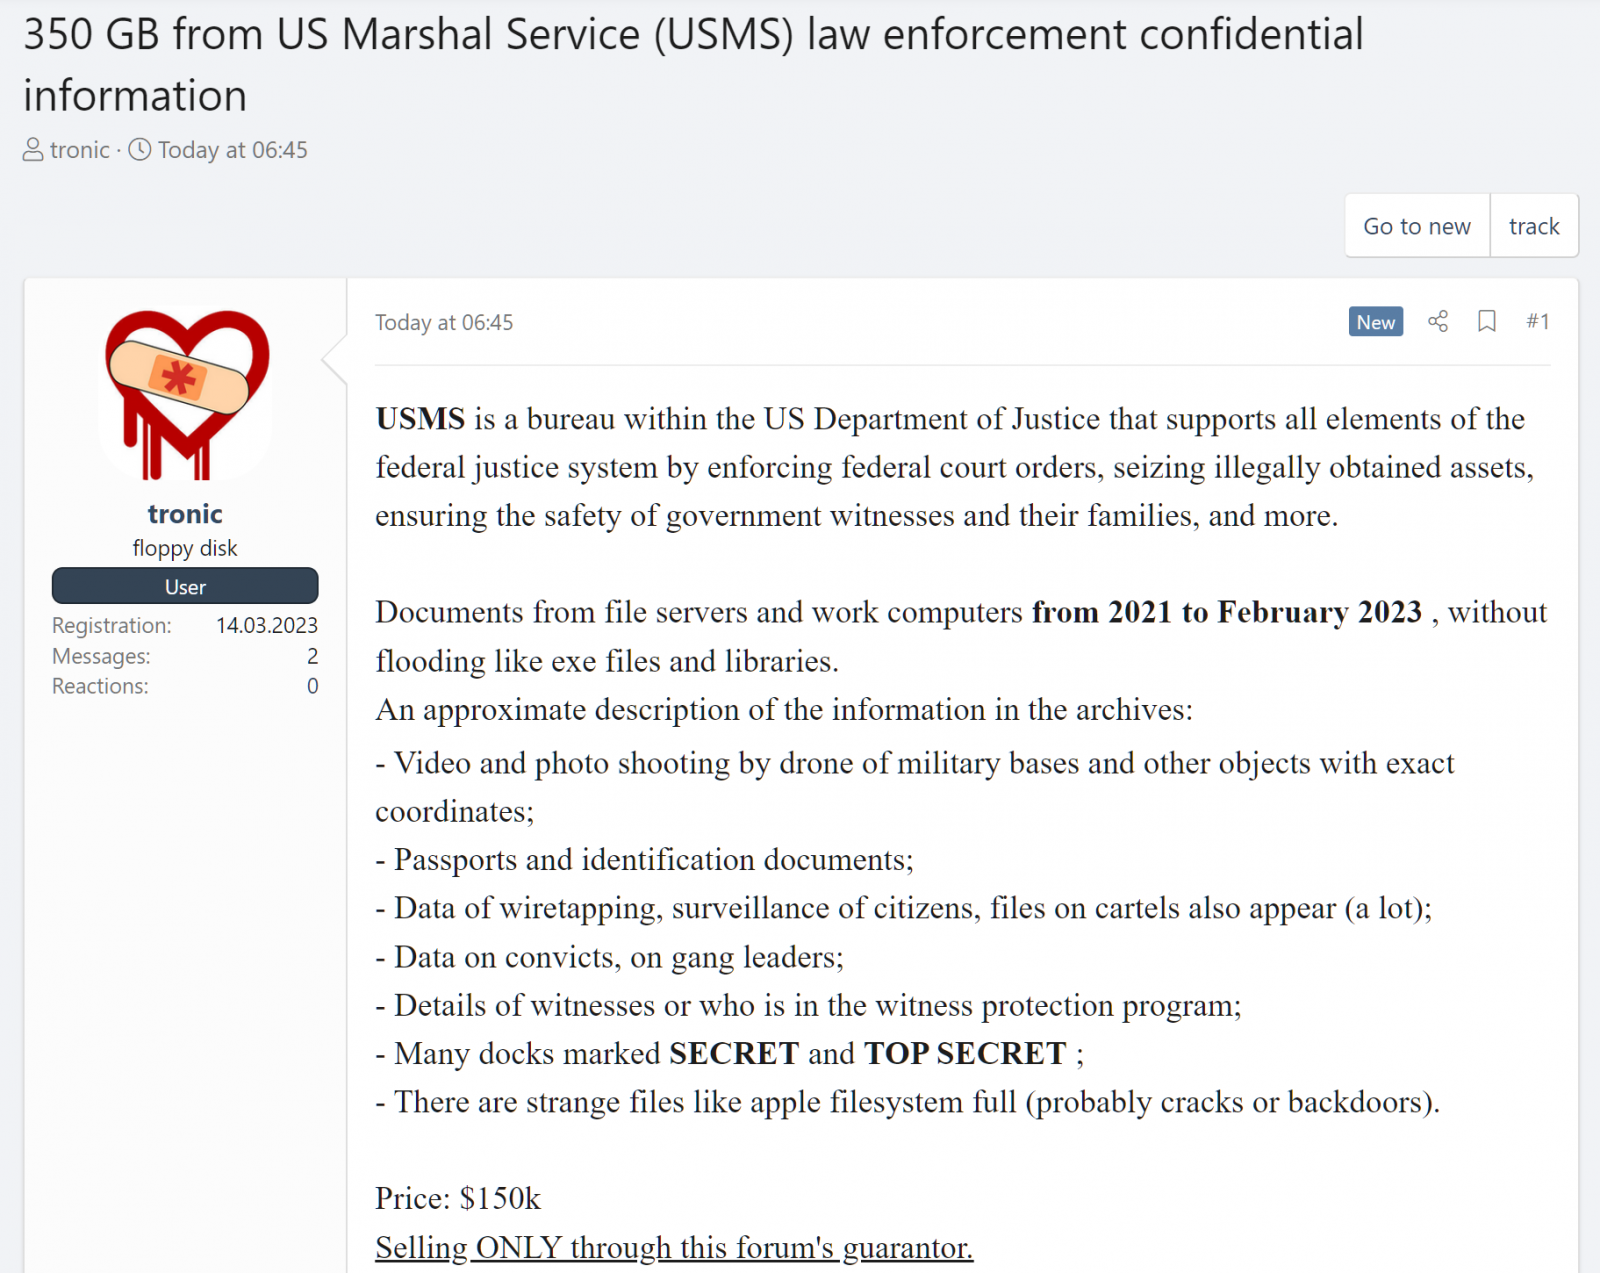 Data allegedly stolen from USMS for sale